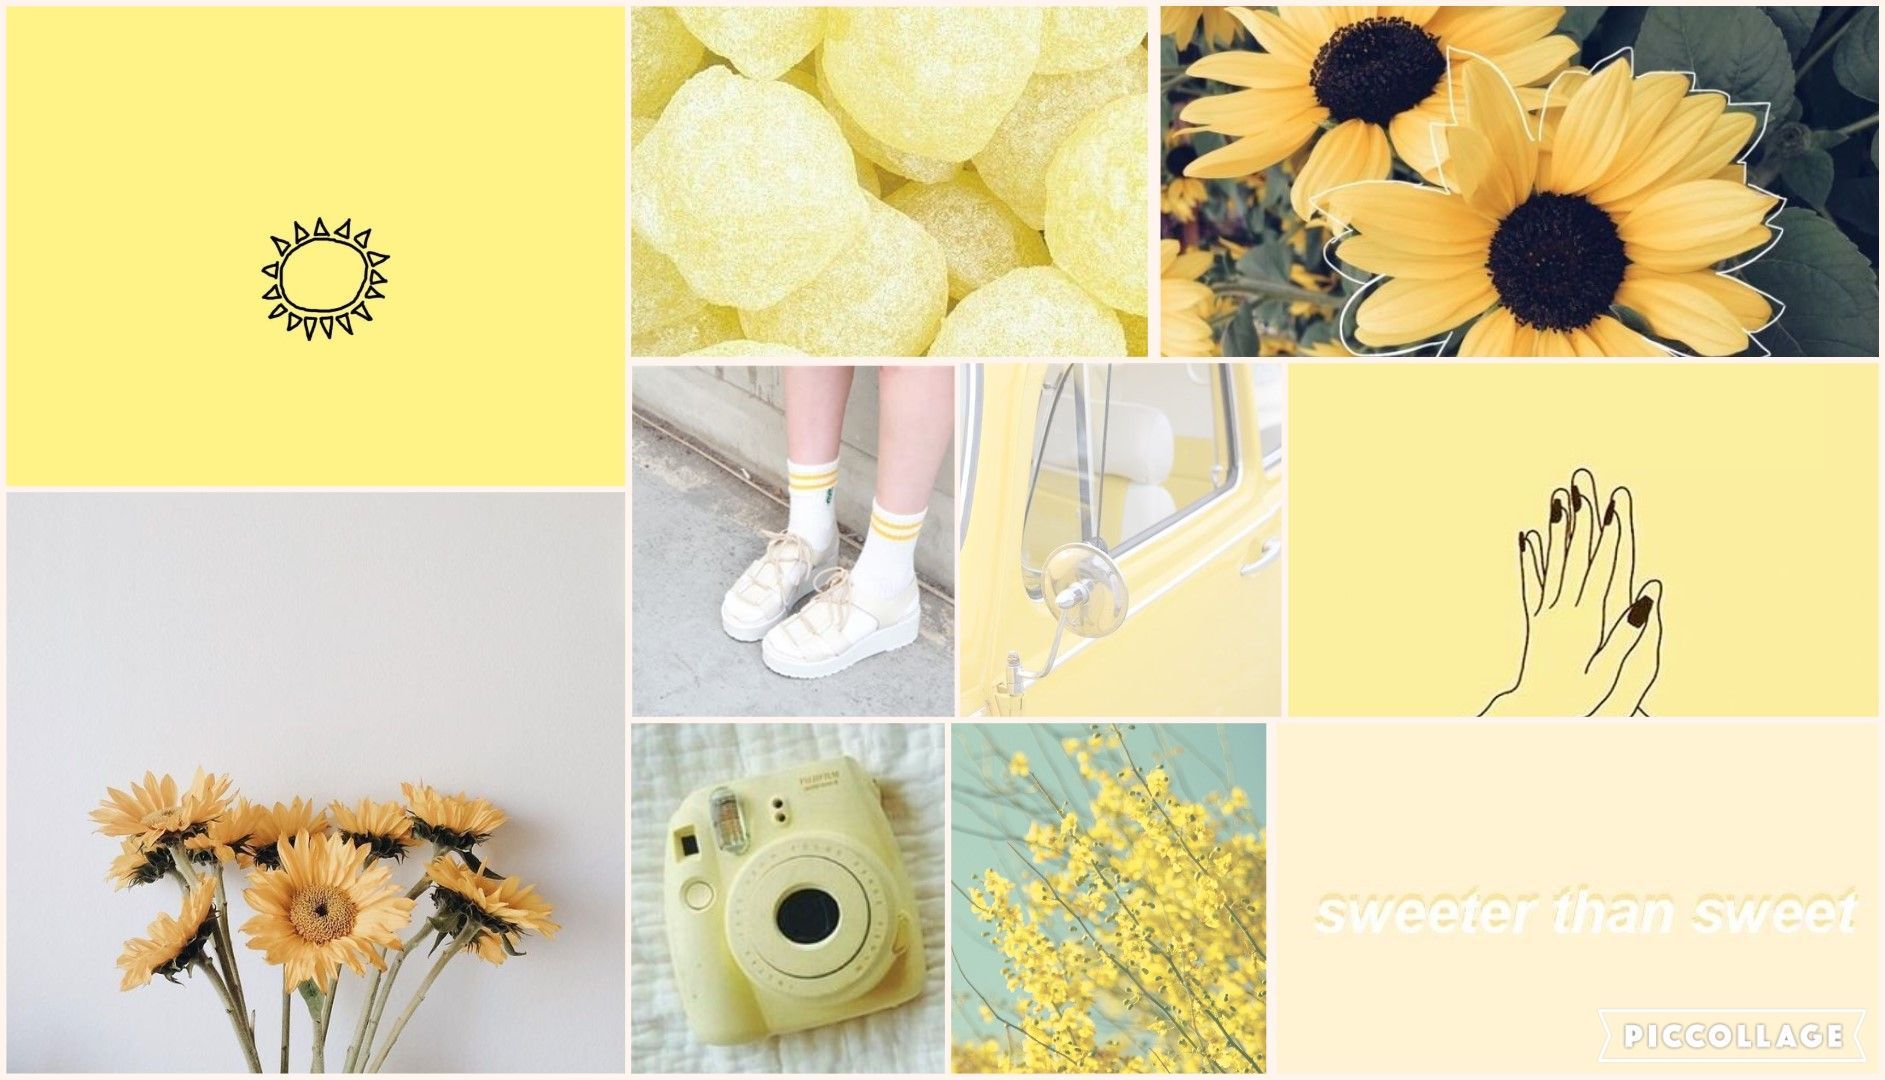 Aesthetic yellow collage. yellow flowers. yellow picture. Aesthetic. sunflowers.wallpaper. Artistic wallpaper, Cute wallpaper background, Collage background